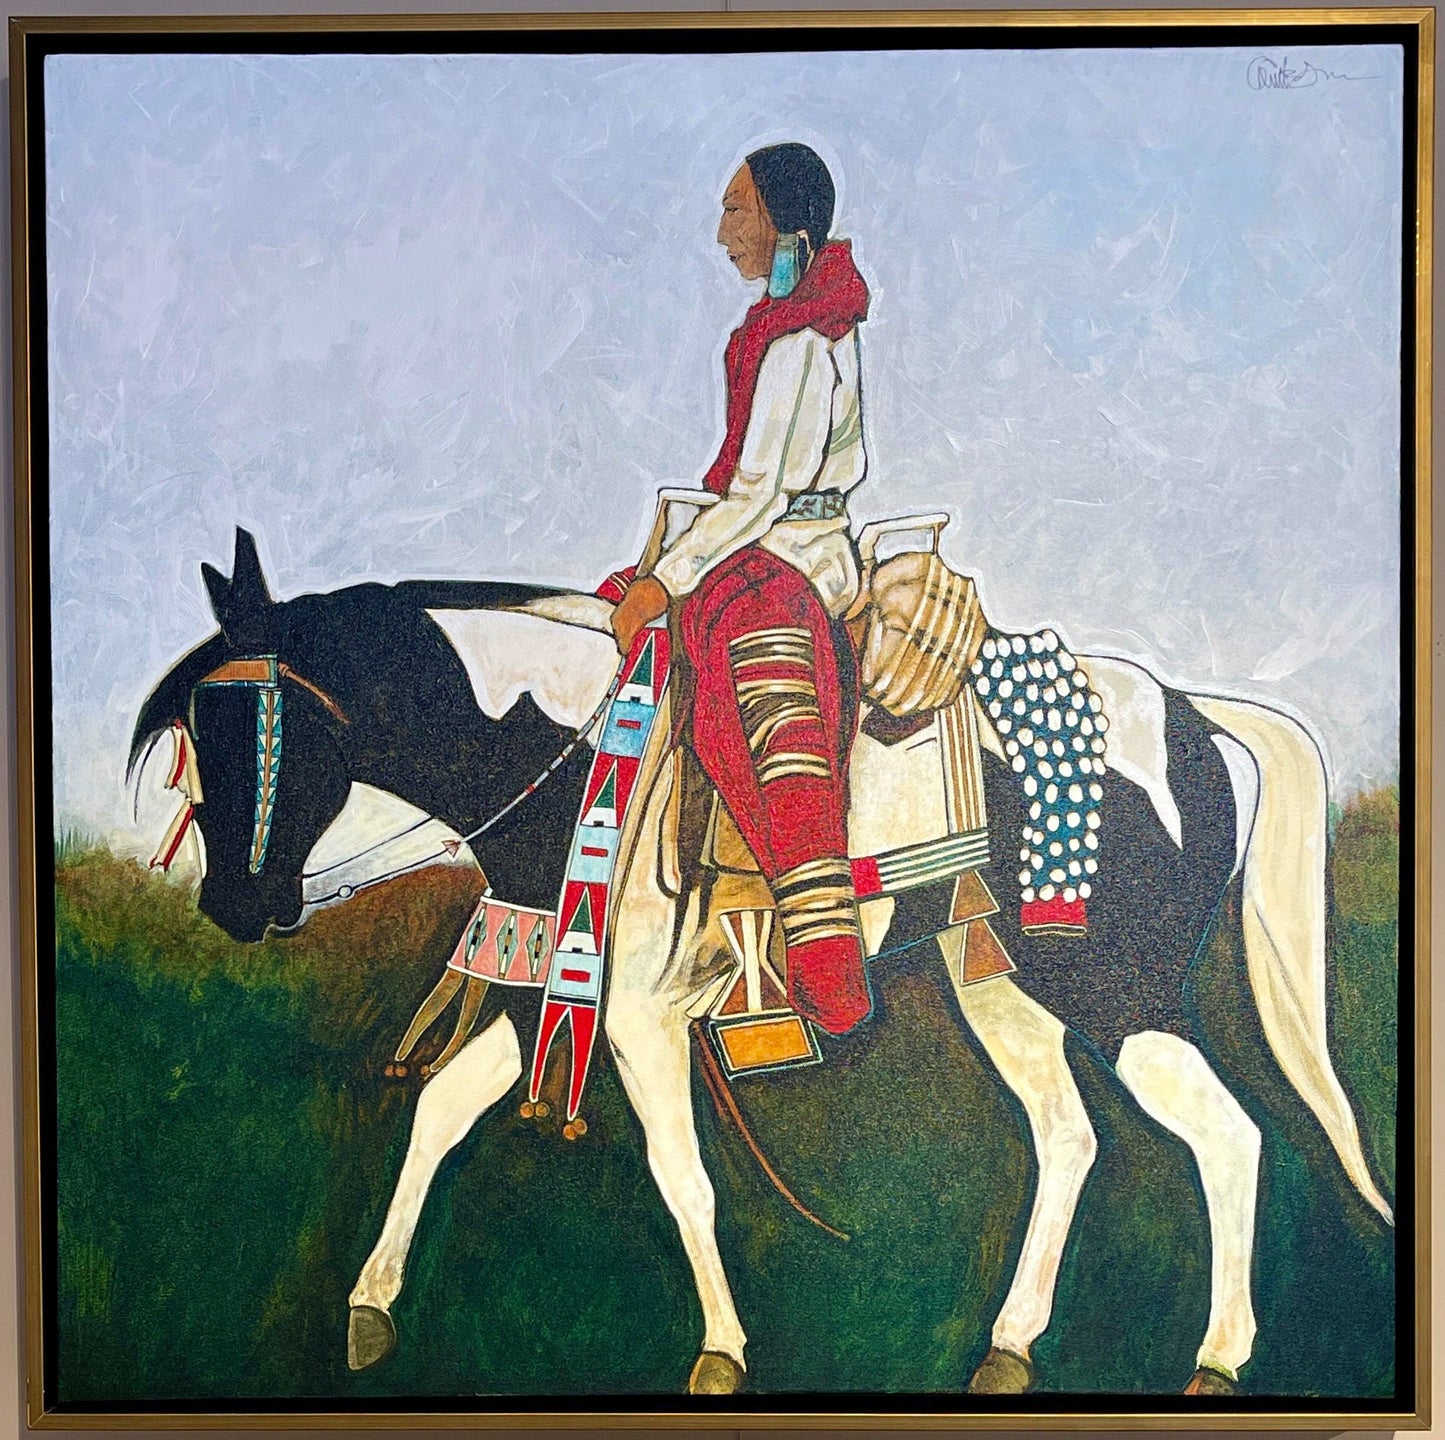 Blue Bird Parade Horse-Painting-Kevin Red Star-Sorrel Sky Gallery